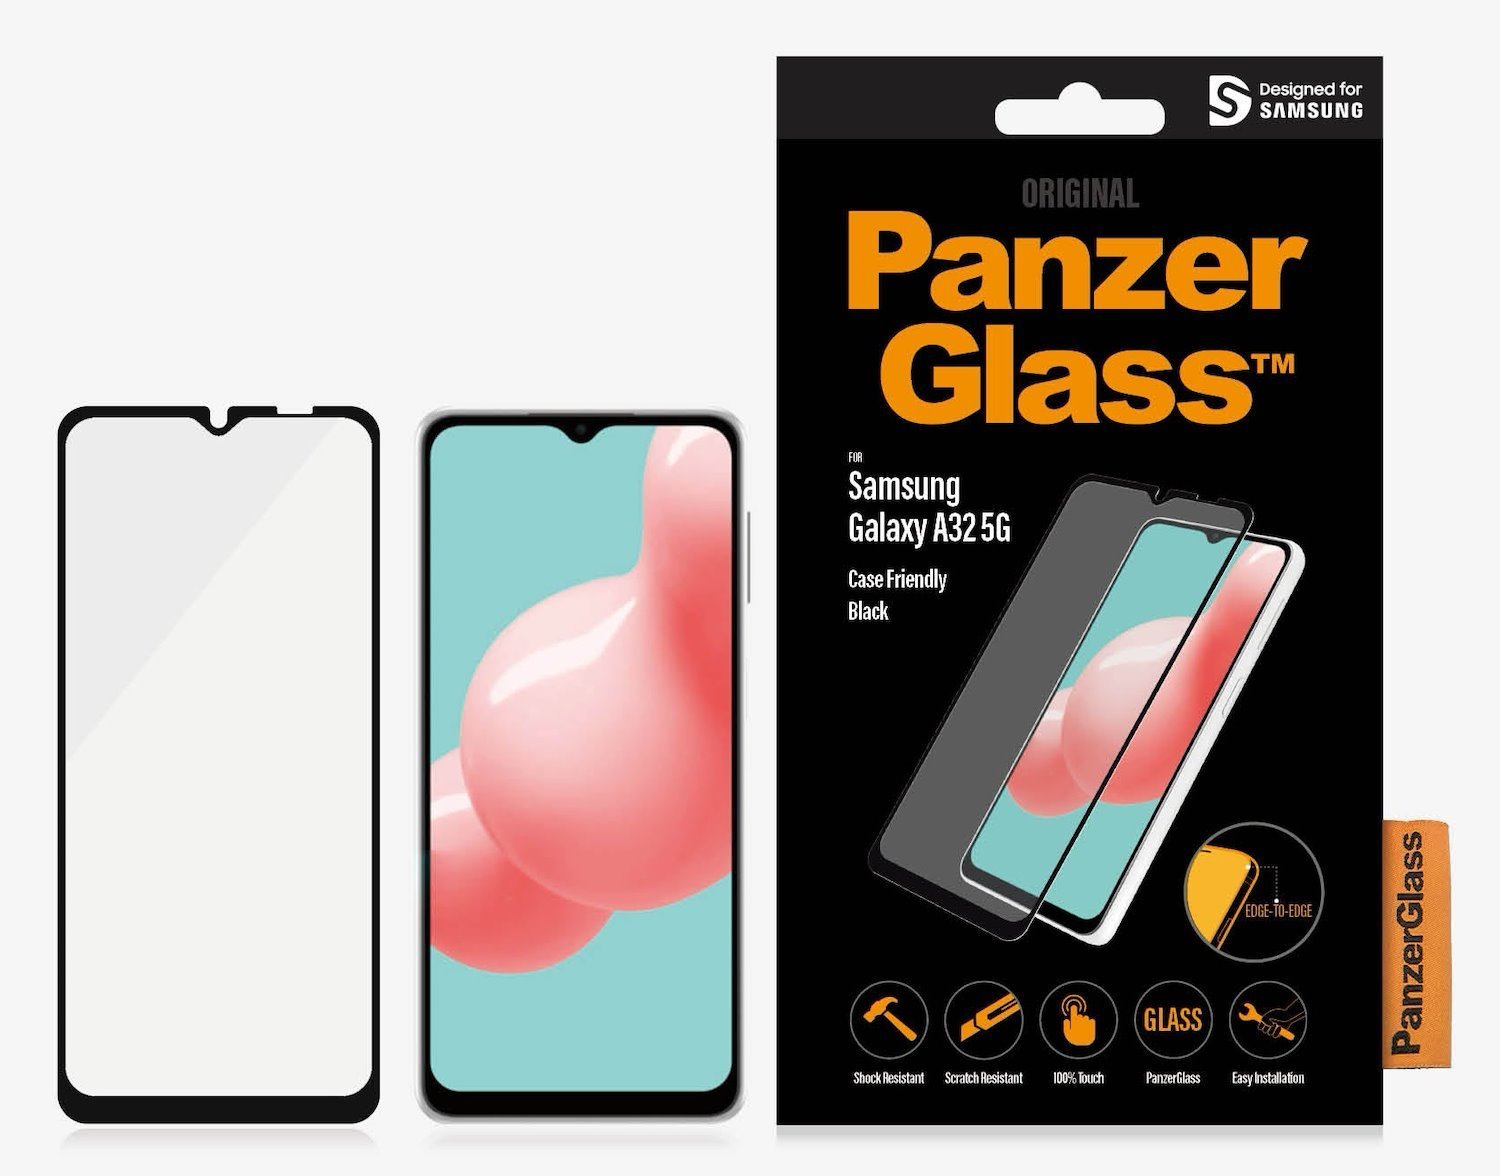 Panzer Glass PanzerGlass Case Friendly Entry Level Screen Protection For Samsung Galaxy A32 5G,Black,Full Frame coverage,Crystal Clear